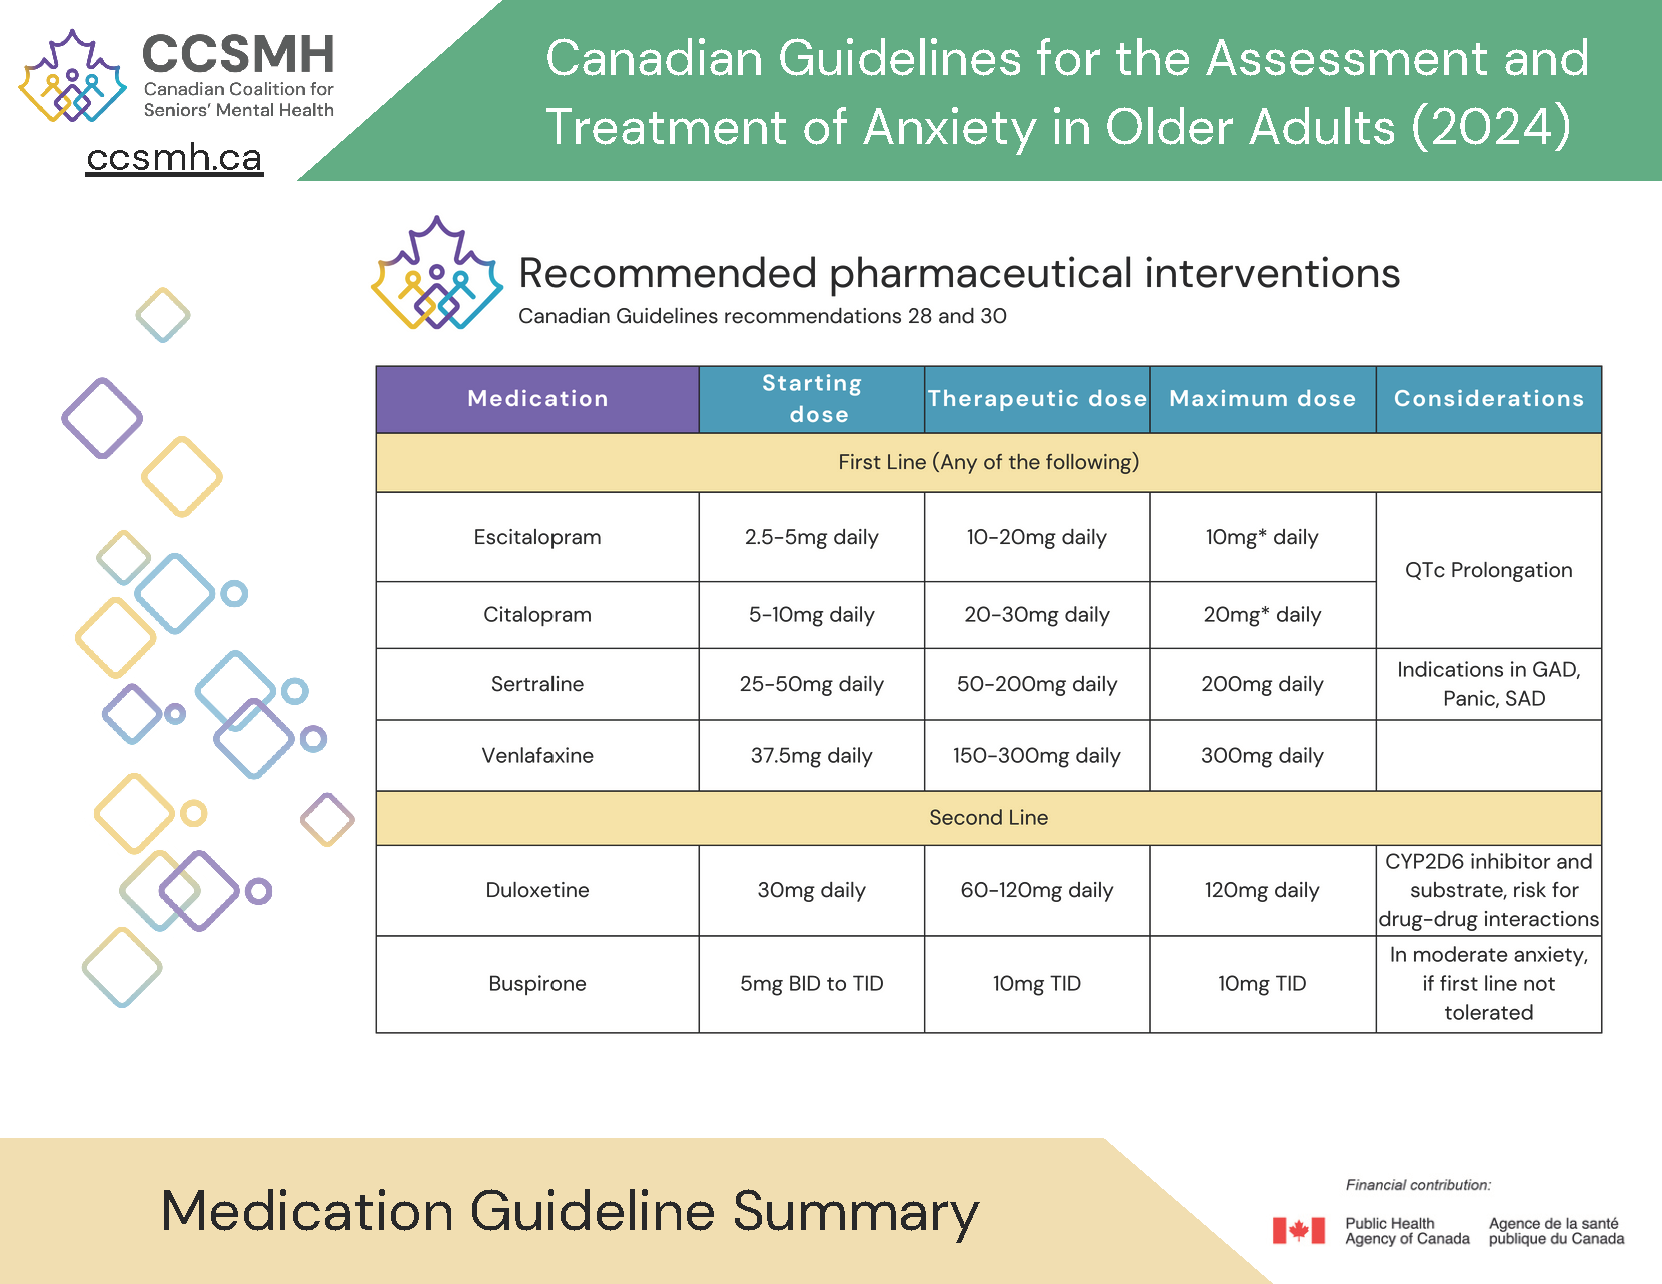 Image of the summary of medications guidelines